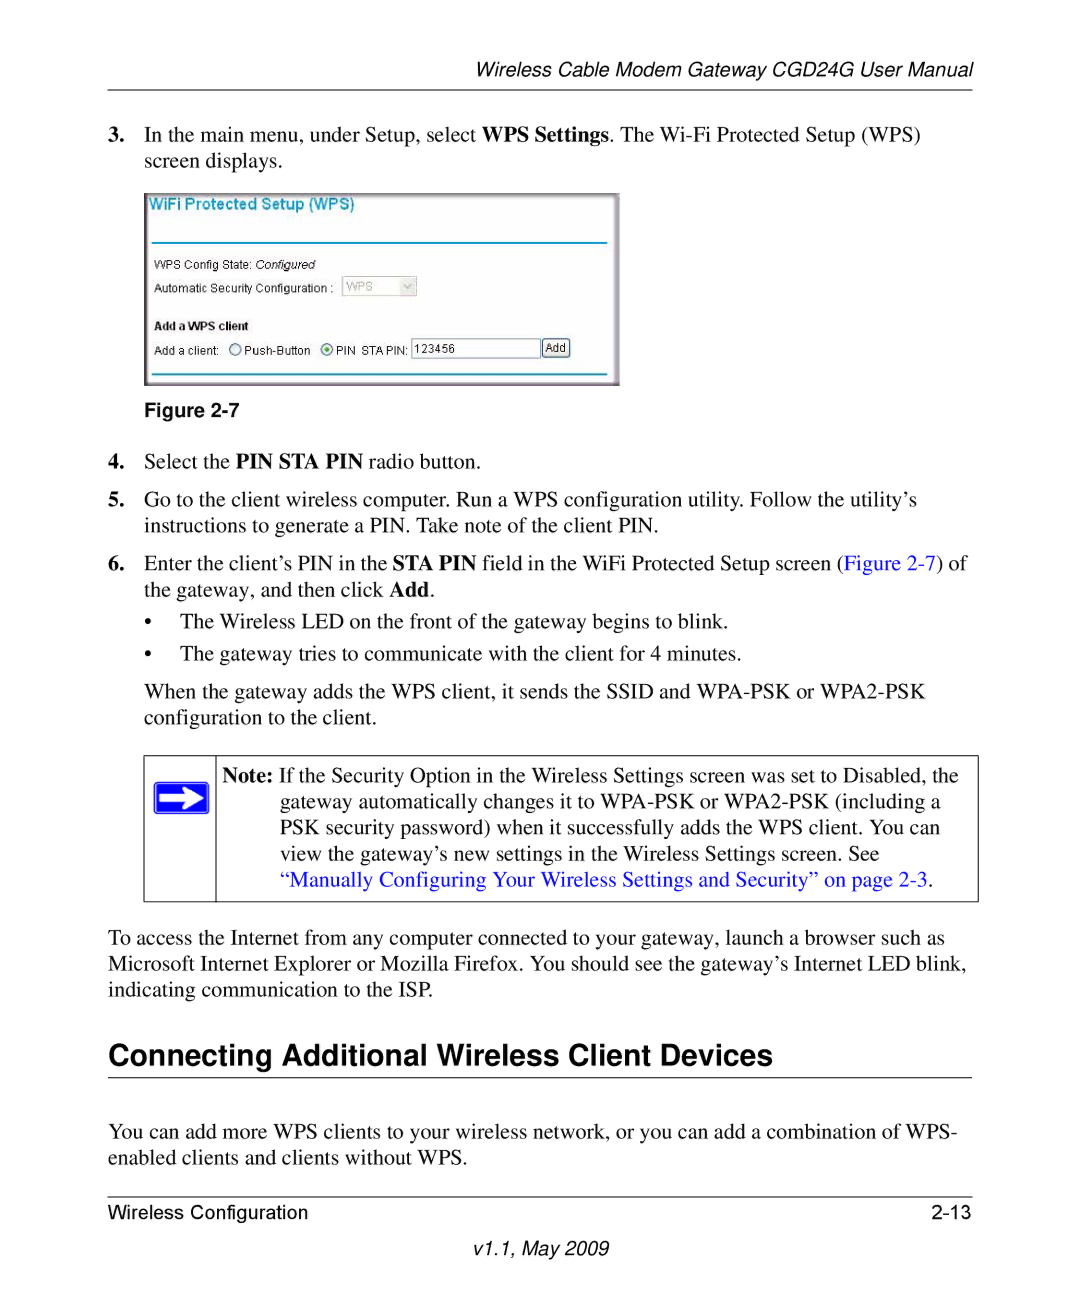 Gateway CGD24G user manual Connecting Additional Wireless Client Devices 